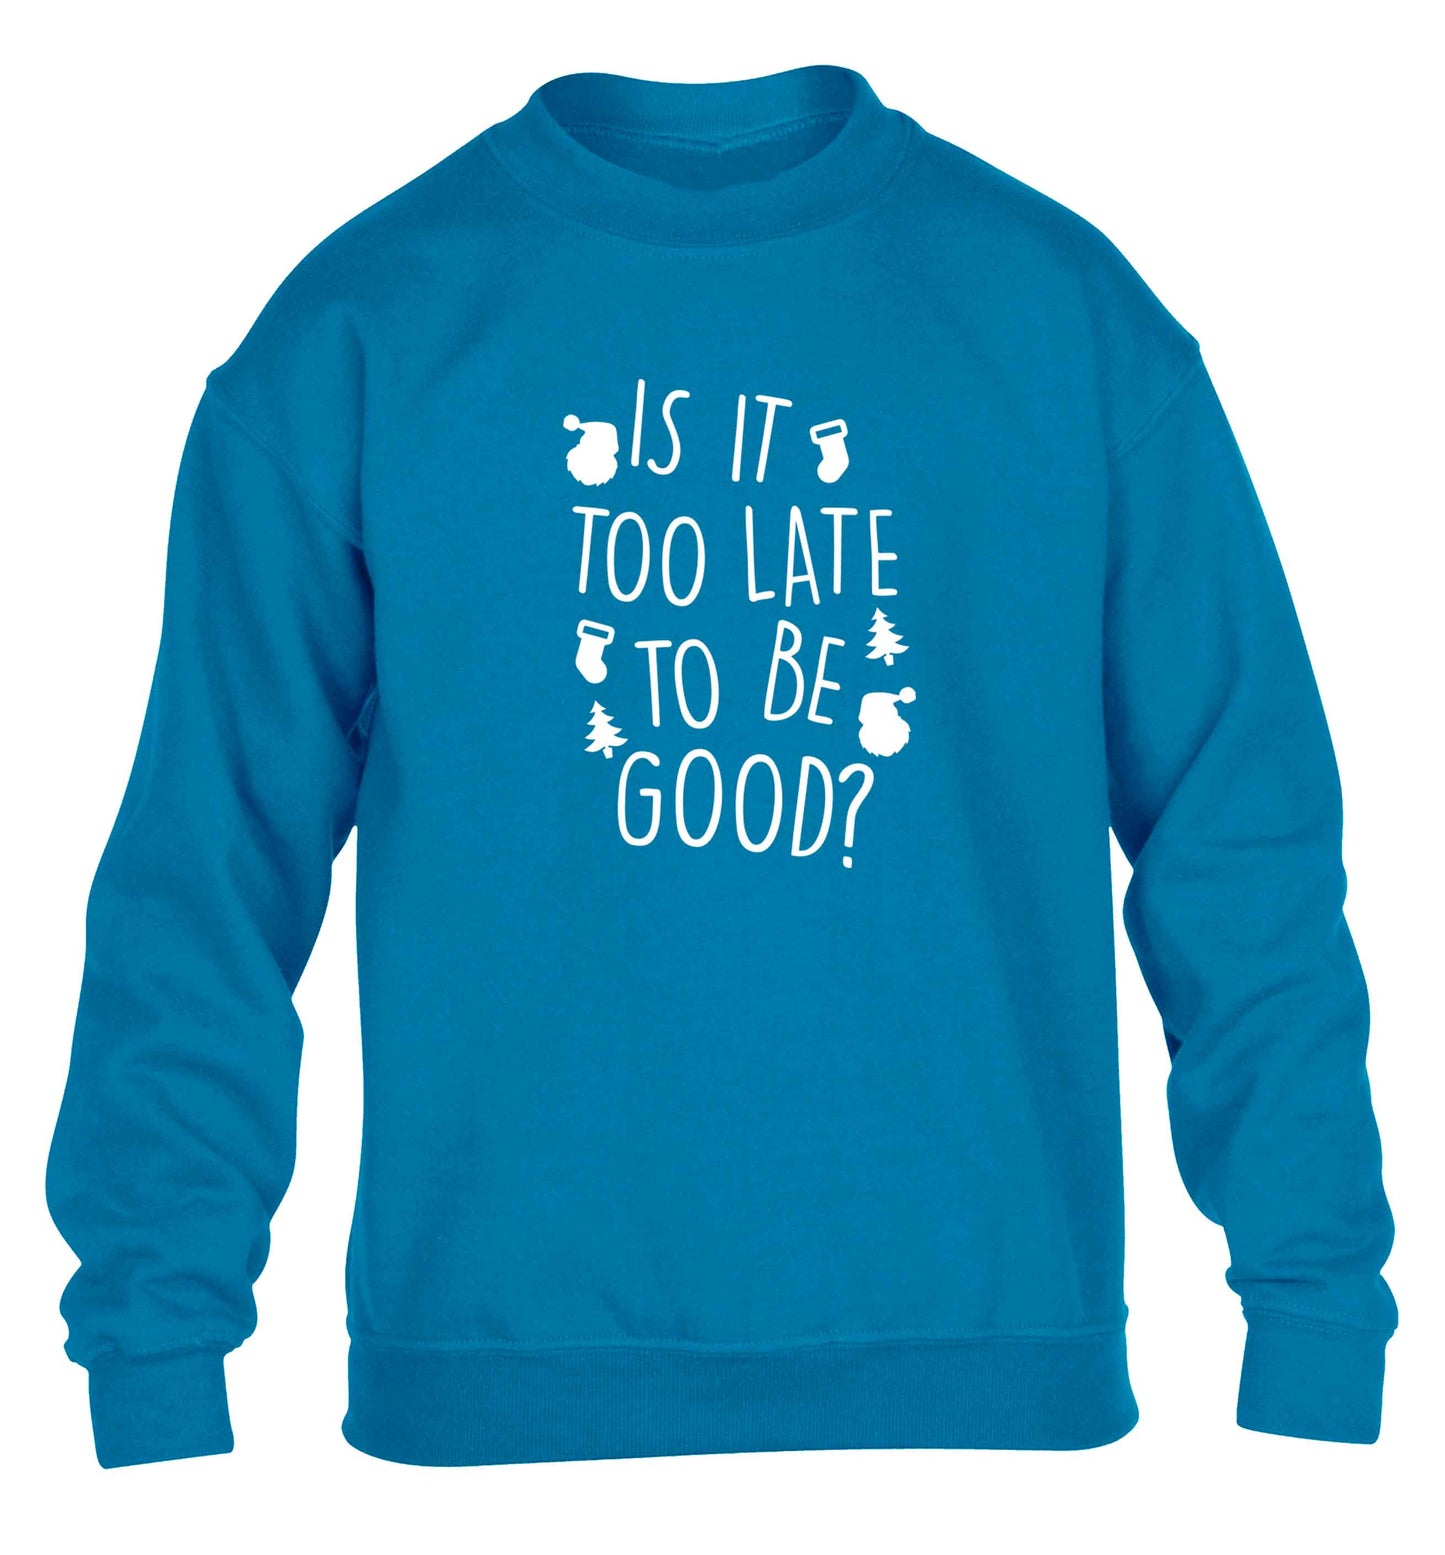 Too Late to be Good children's blue sweater 12-13 Years